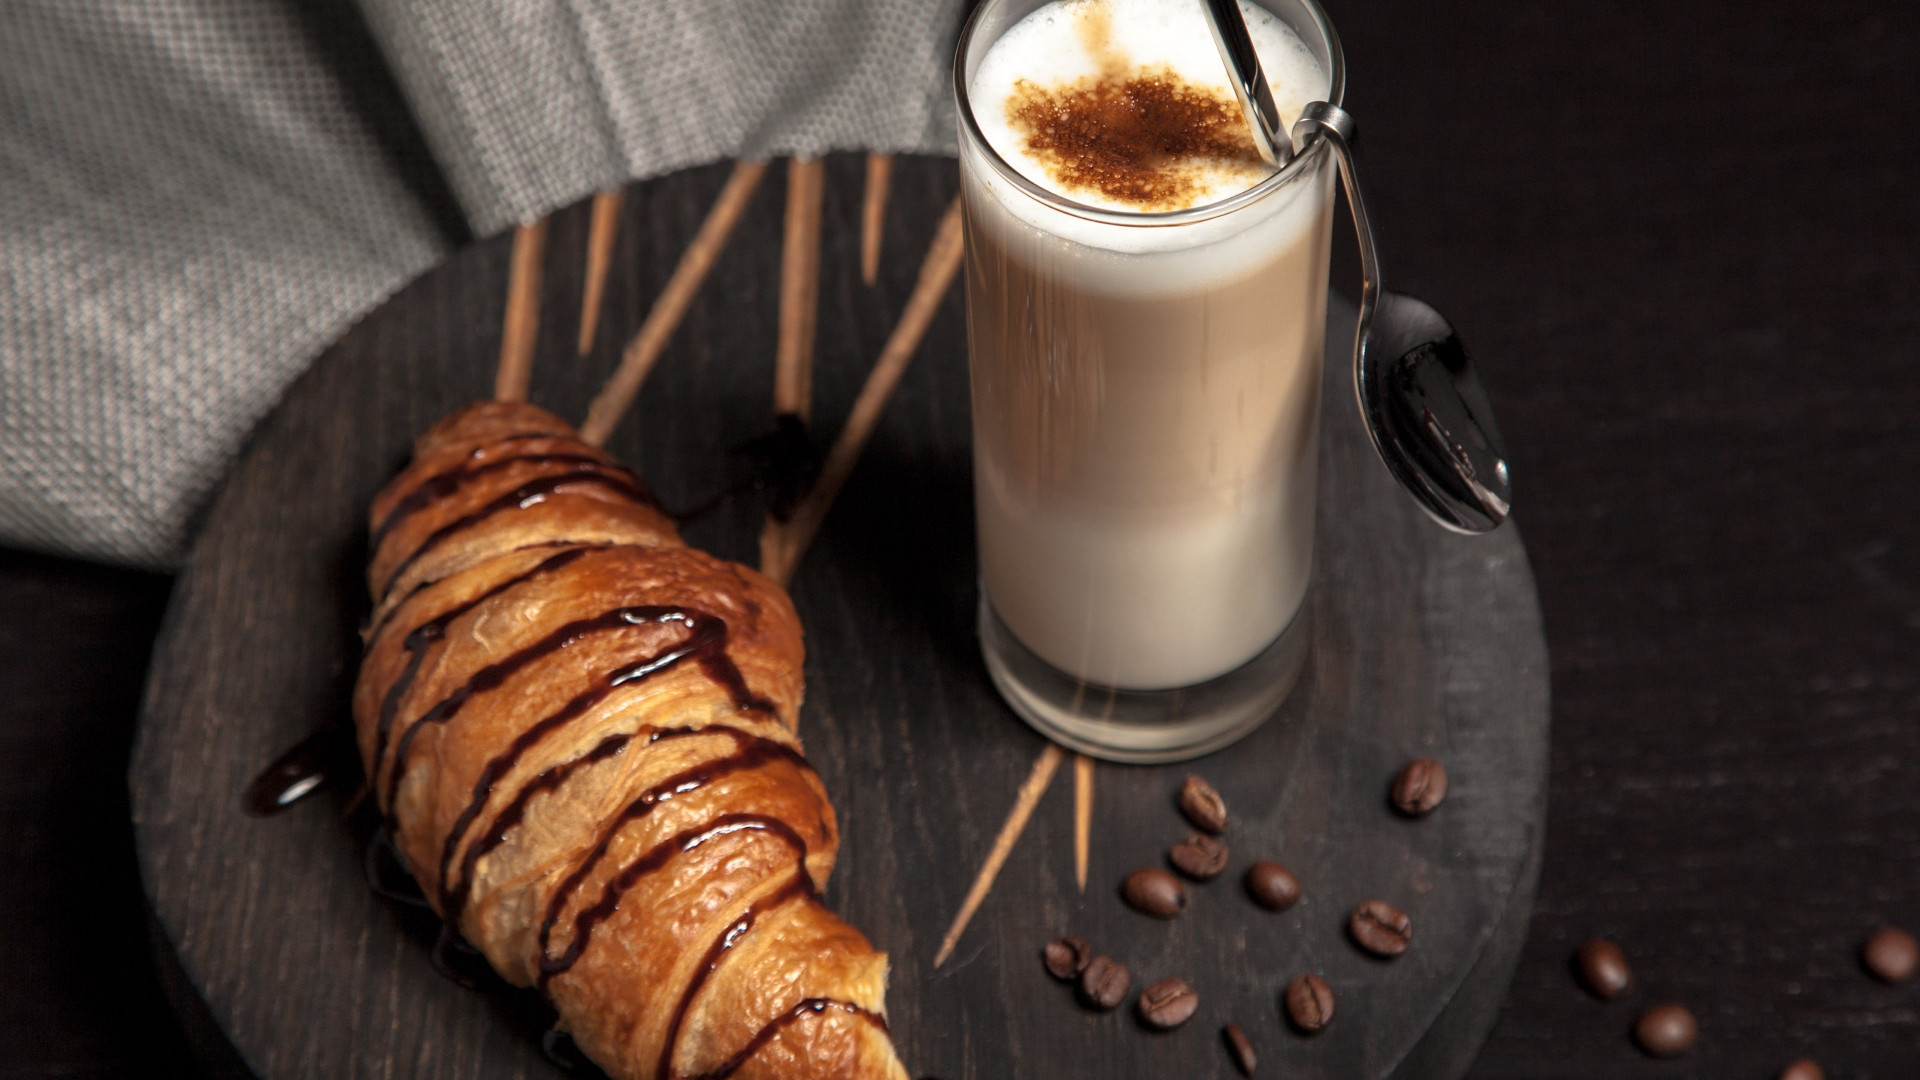 Cappuccino and chocolate croissant wallpaper 1920x1080